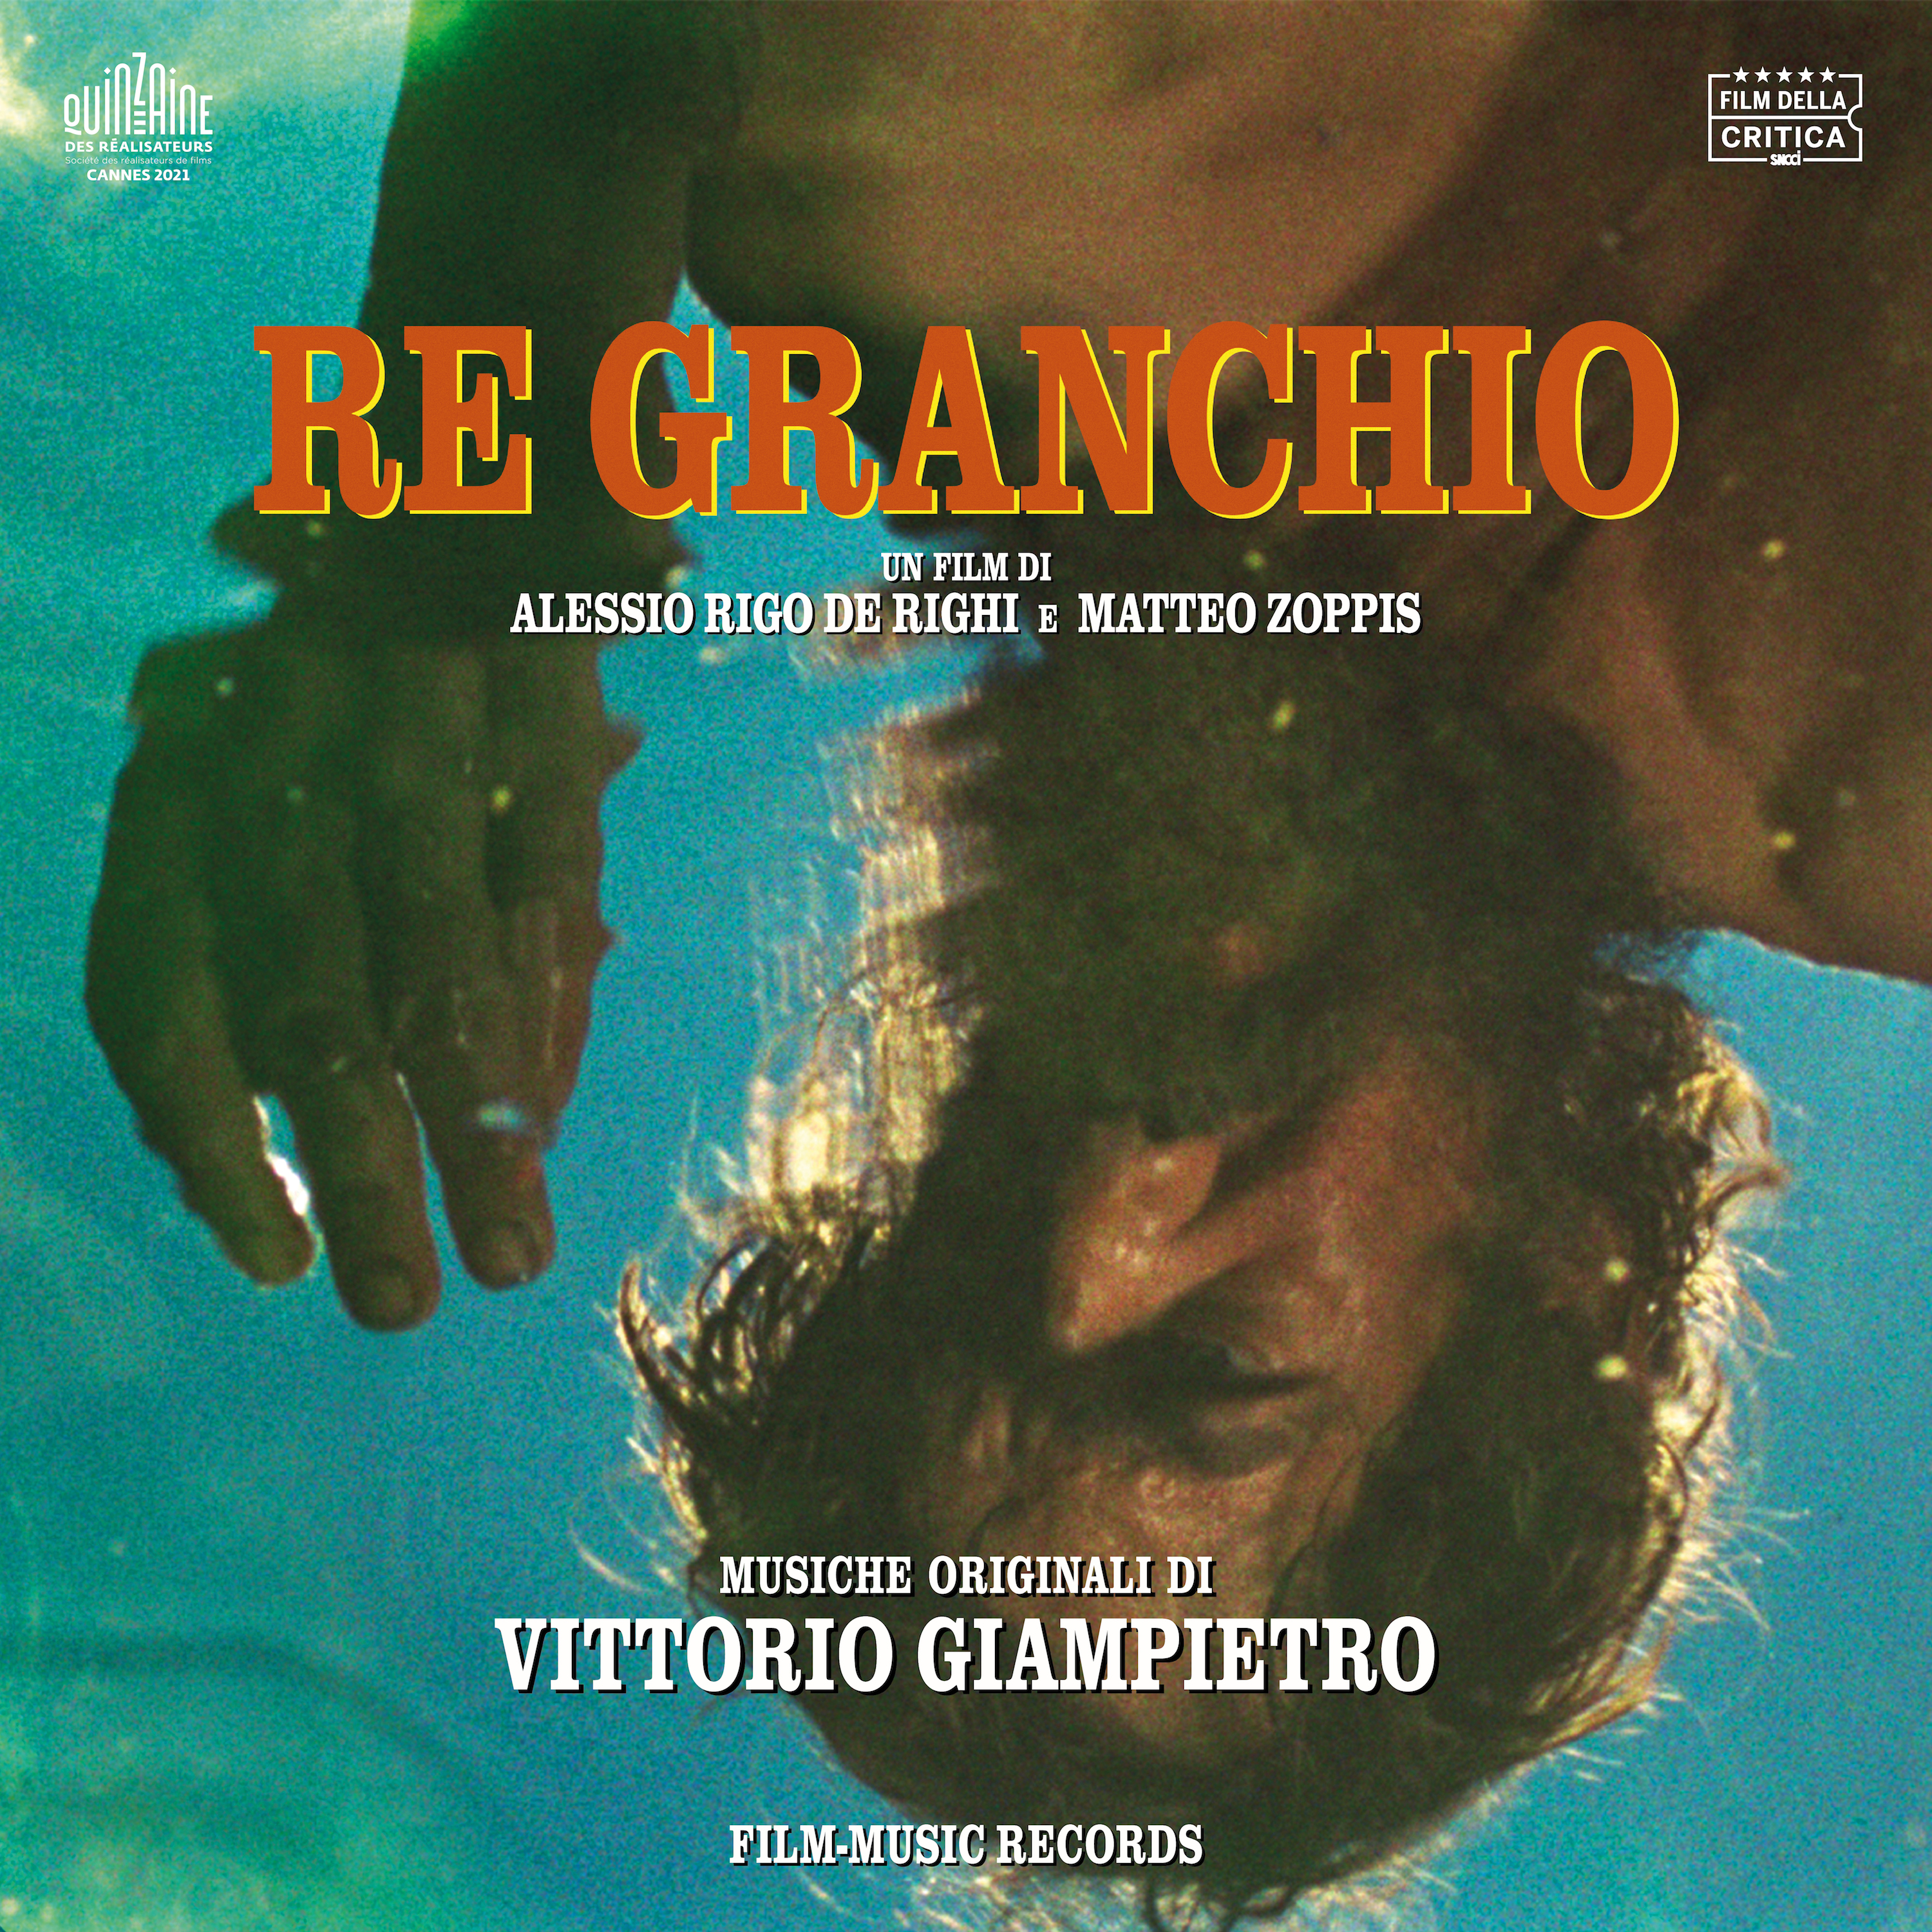 "Re Granchio" the new Soundtrack by Vittorio Giampietro will be released on December 9, 2021 on Spotify and on all Digital Music Streaming Services around the world.